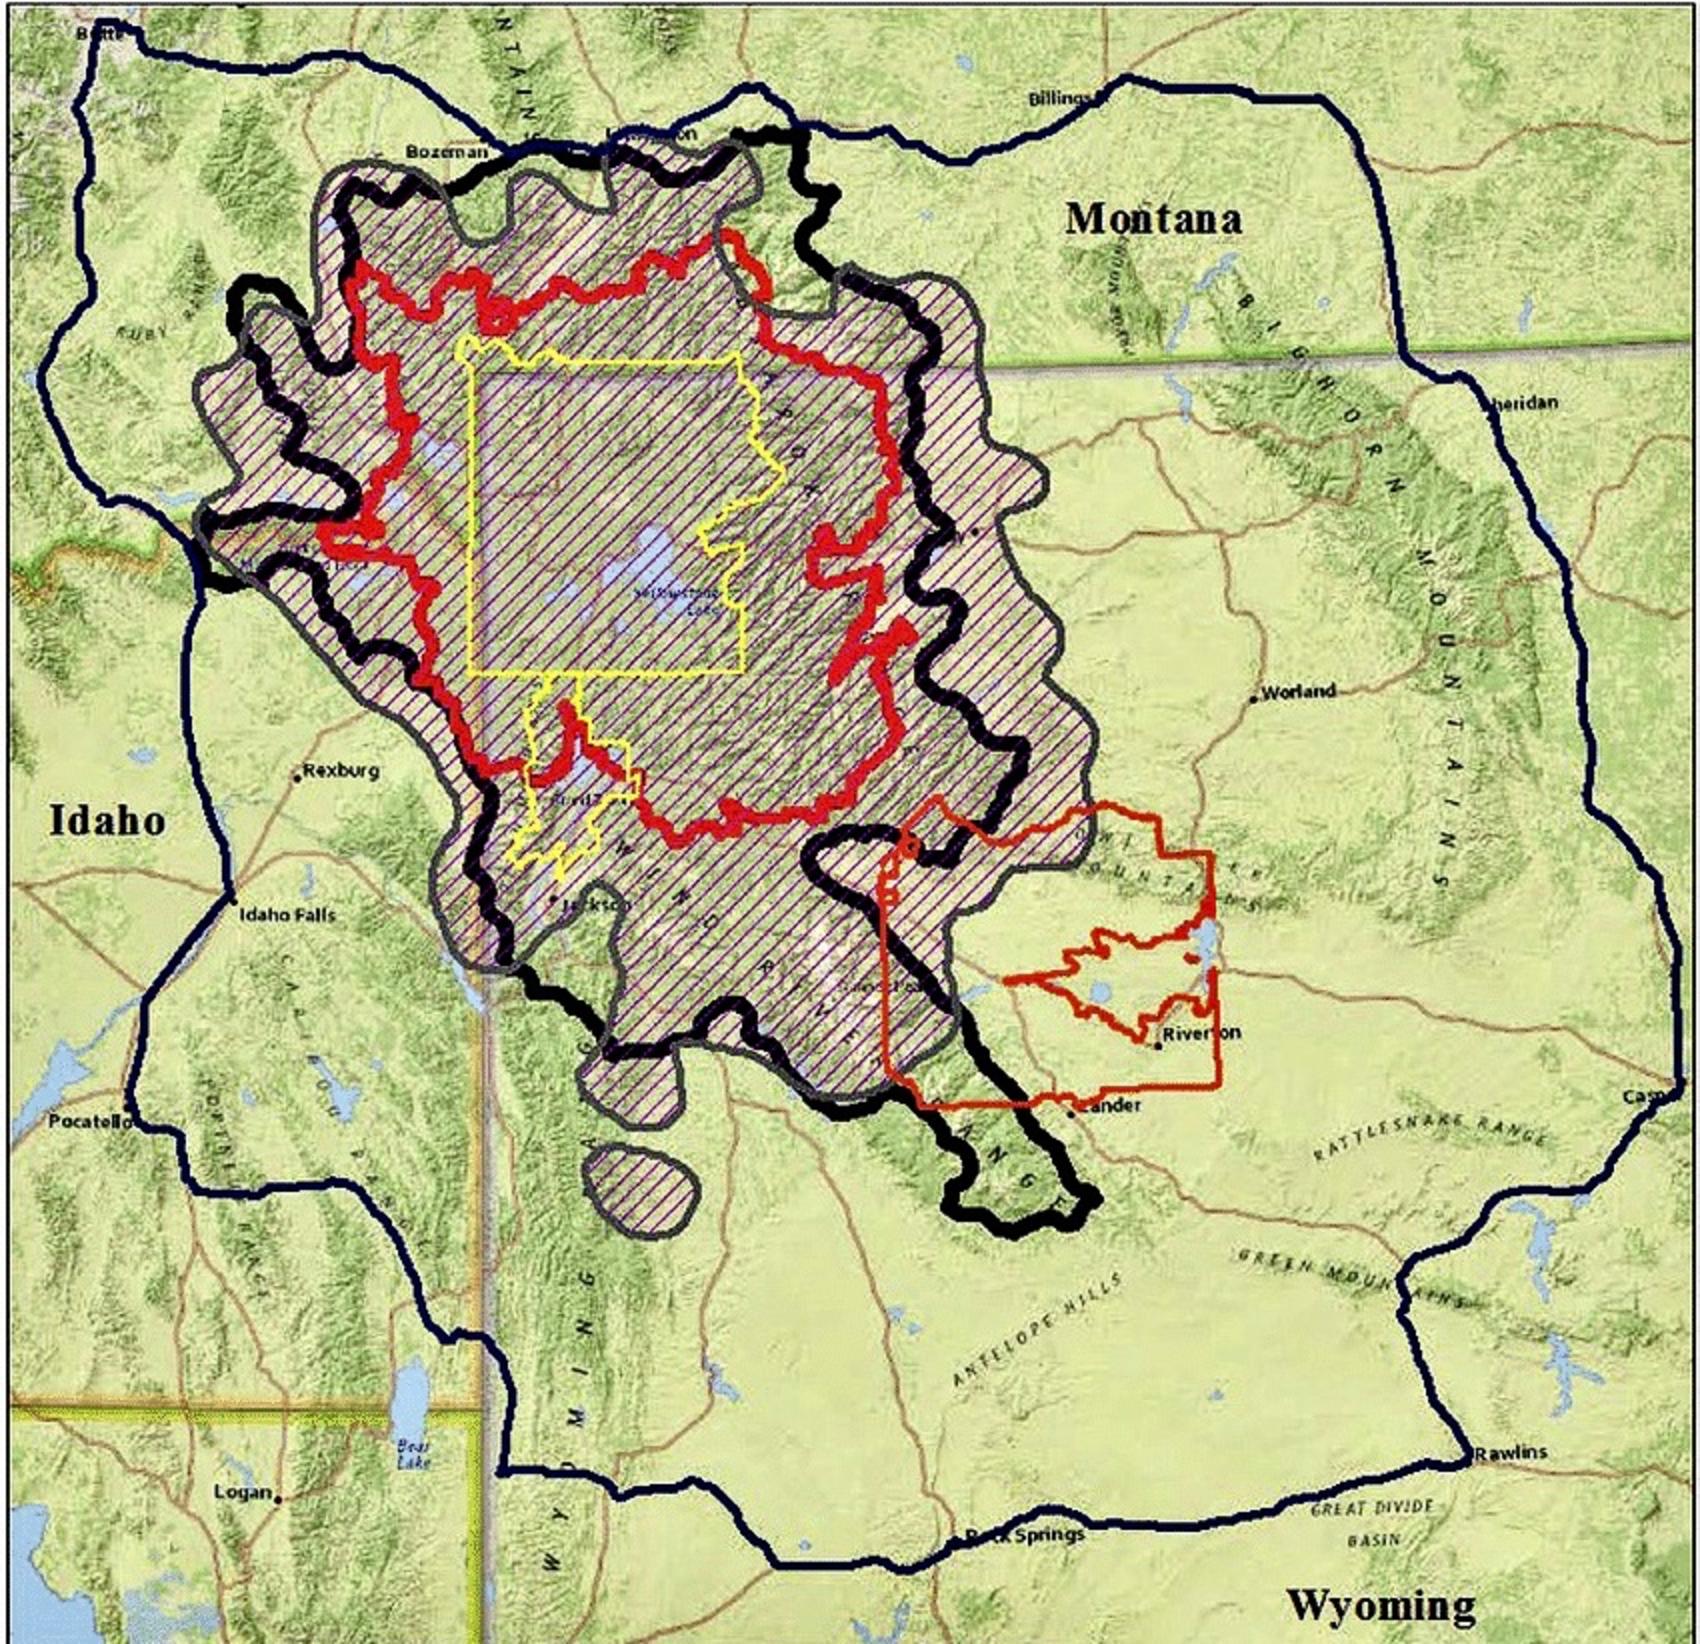 Boundaries of Yellowstone and Grand Teton national parks in yellow. Primary bear recovery zone, which represented grizzly bear distribution at time of federal listing in mid 1970s, in red.  Bold purple line, just beyond, encompasses where bears are today in numbers that count toward maintaining population objectives. Click on map to make larger